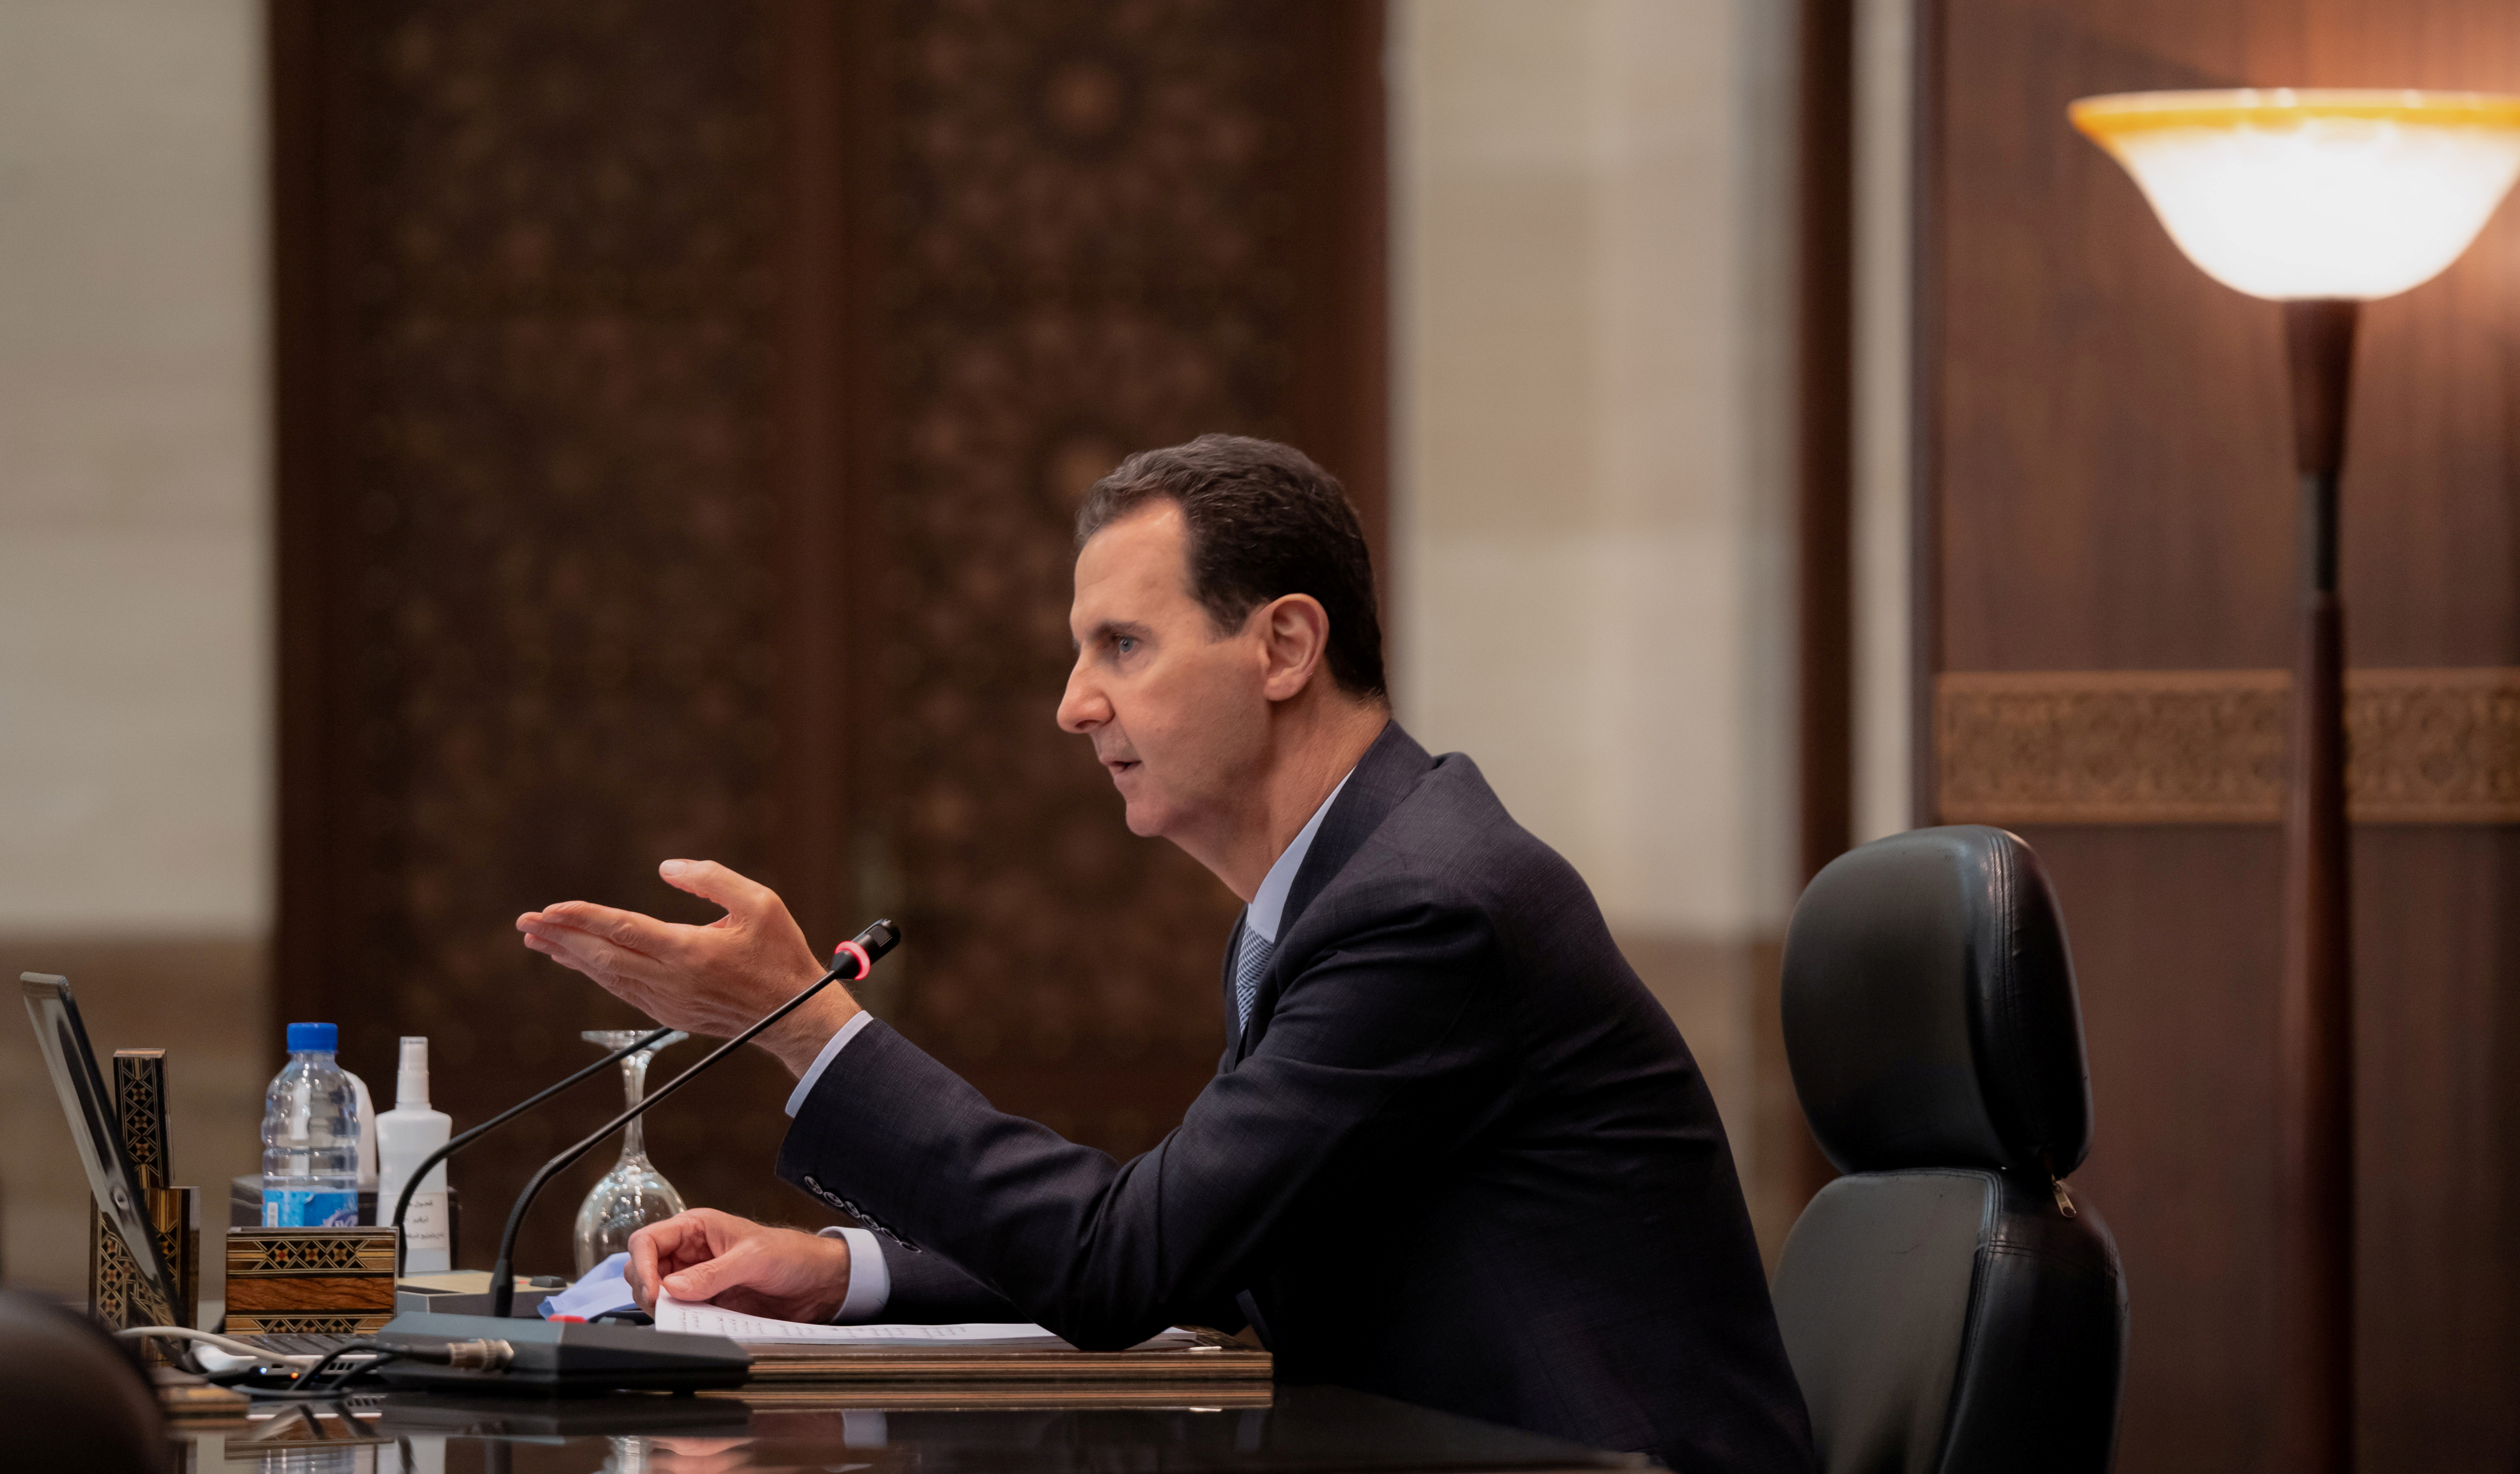 Syrian President Bashar al-Assad speaks at a meeting of his cabinet in Damascus, Syria, in this handout picture released by SANA on March 30, 2021. SANA/Handout via REUTERS